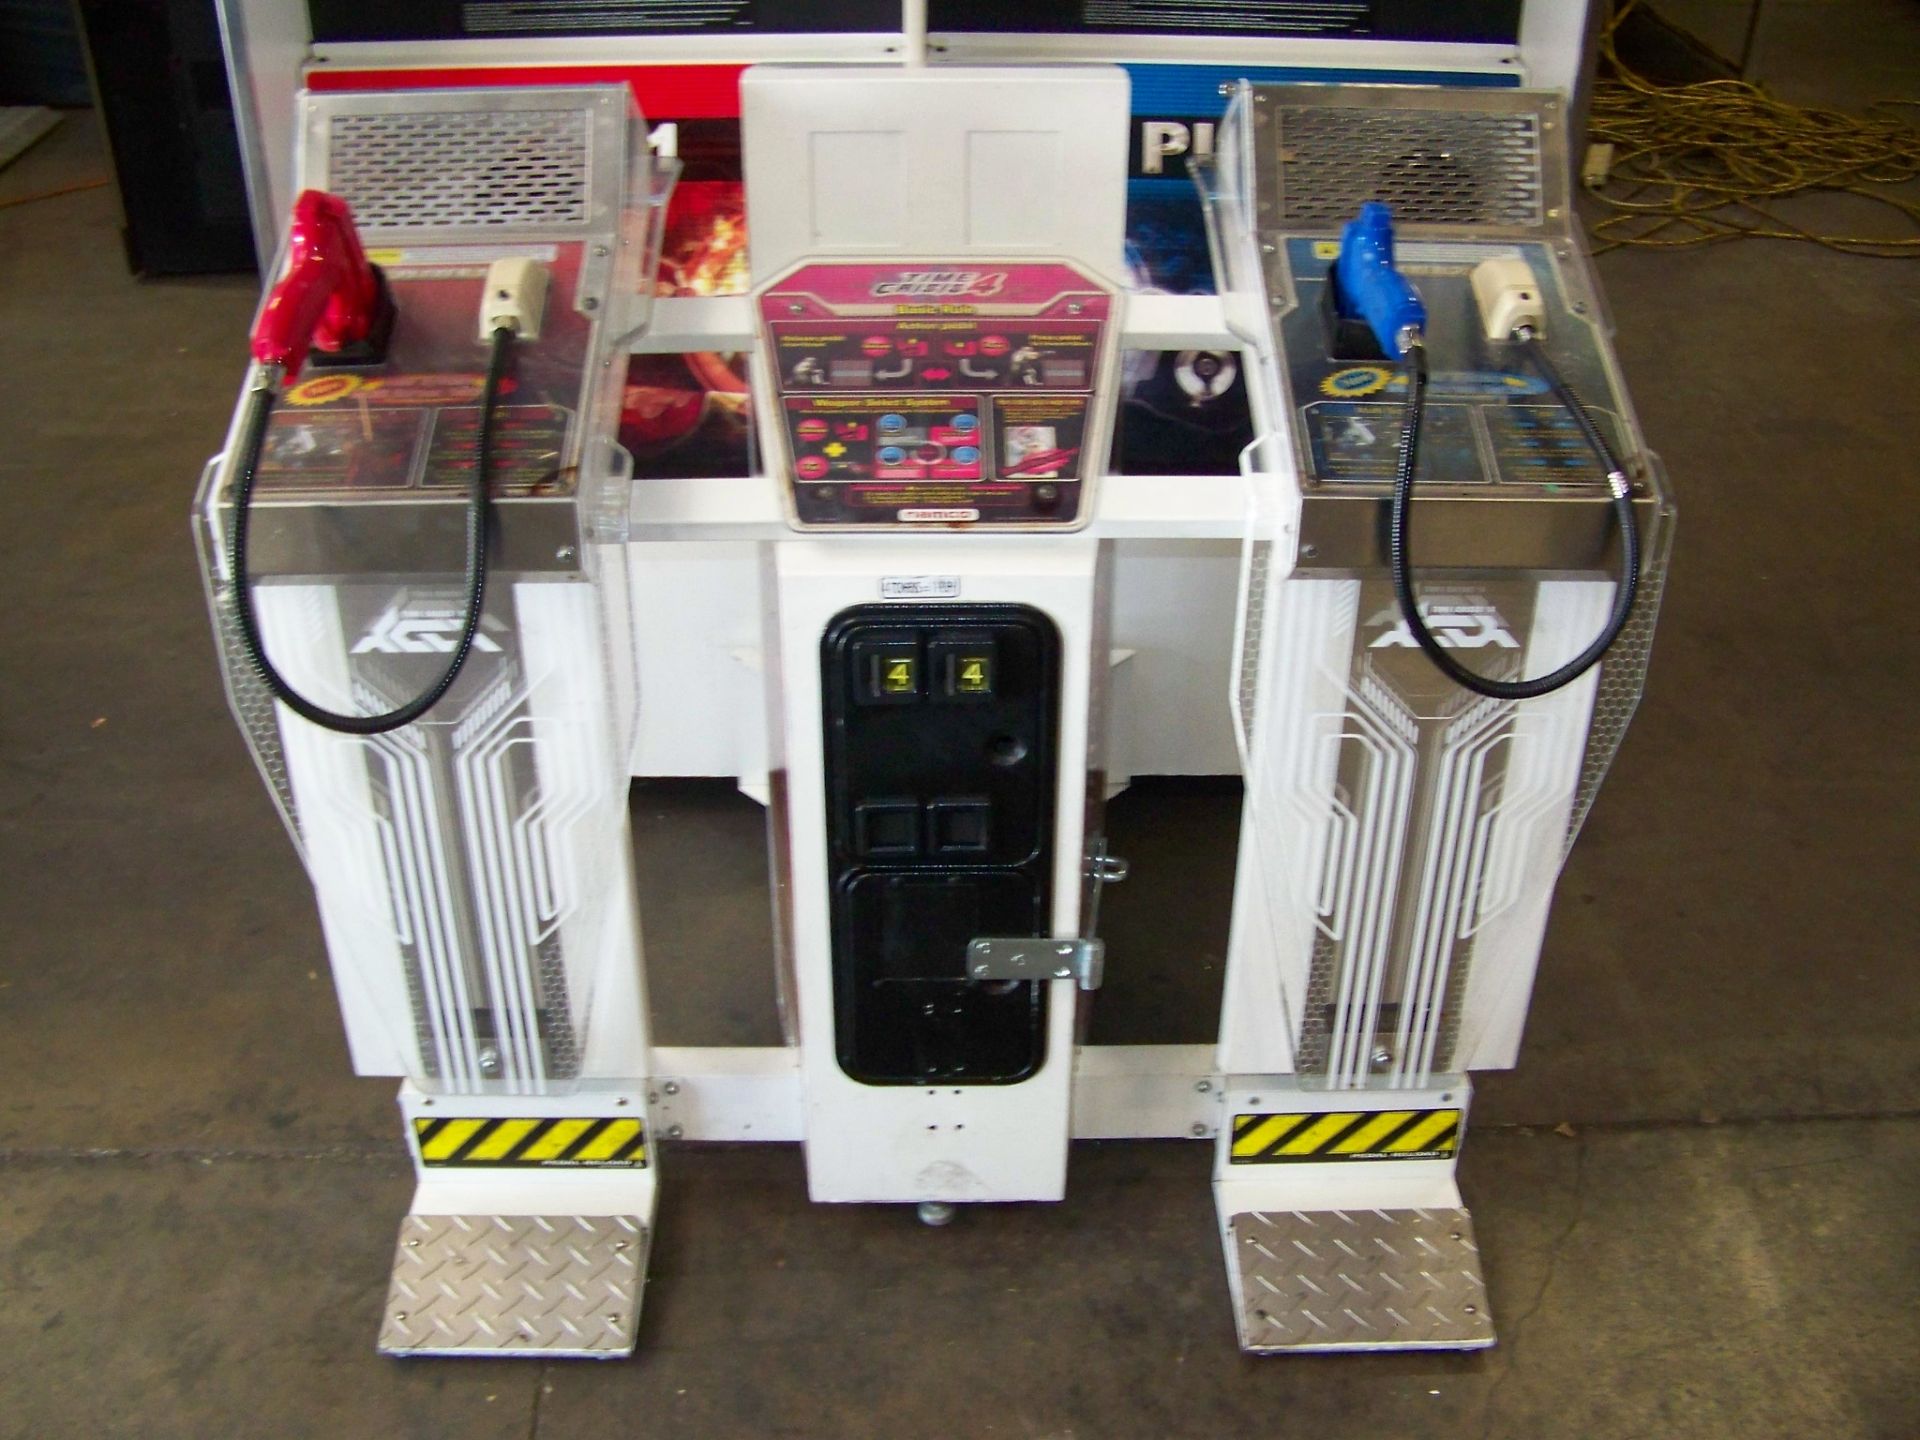 TIME CRISIS 4 TWIN SHOOTER ARCADE GAME NAMCO Item is in used condition. Evidence of wear and - Image 5 of 8